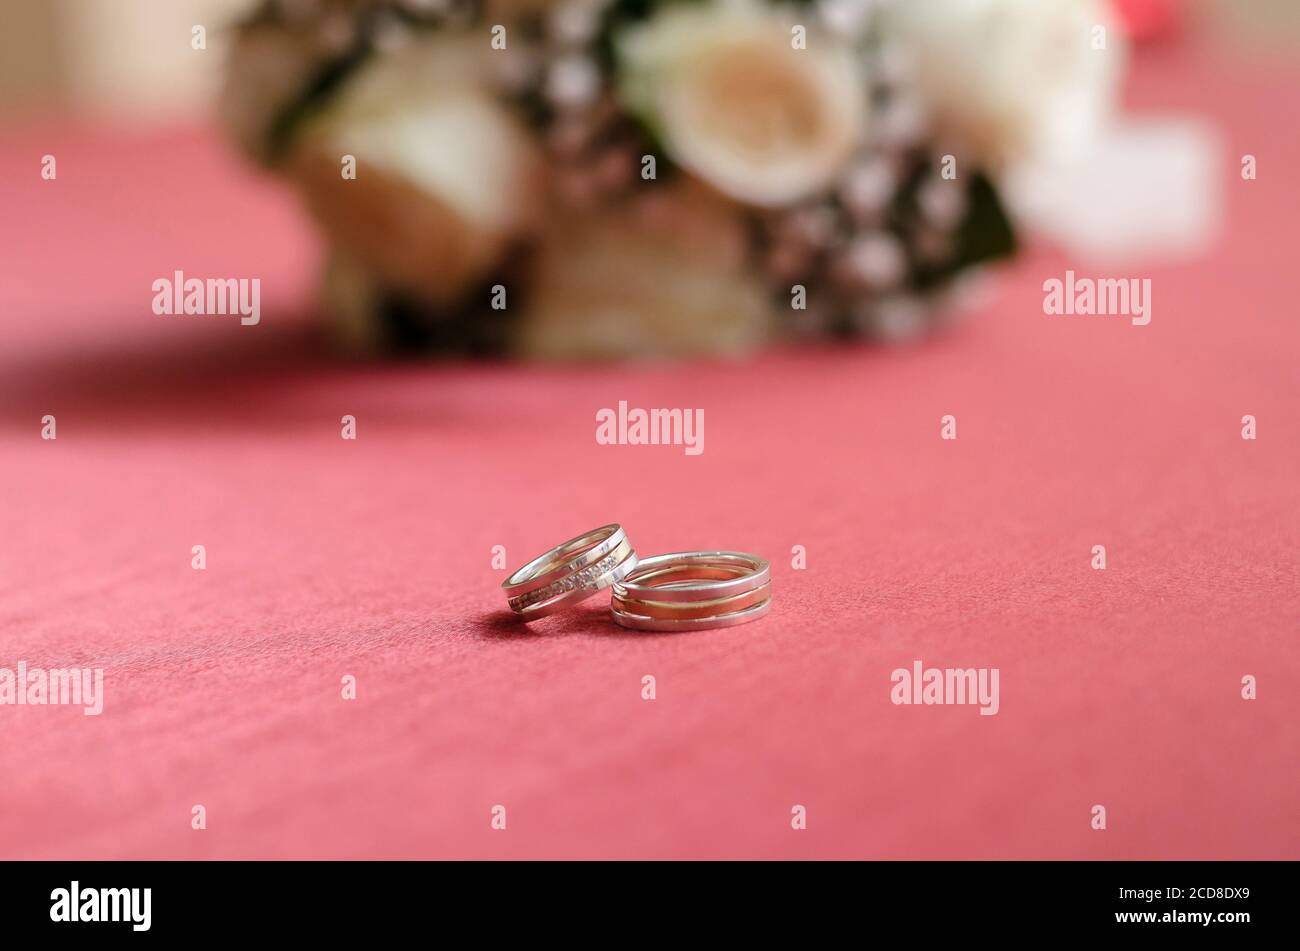 Gold wedding rings are on the pink table. Close up Stock Photo